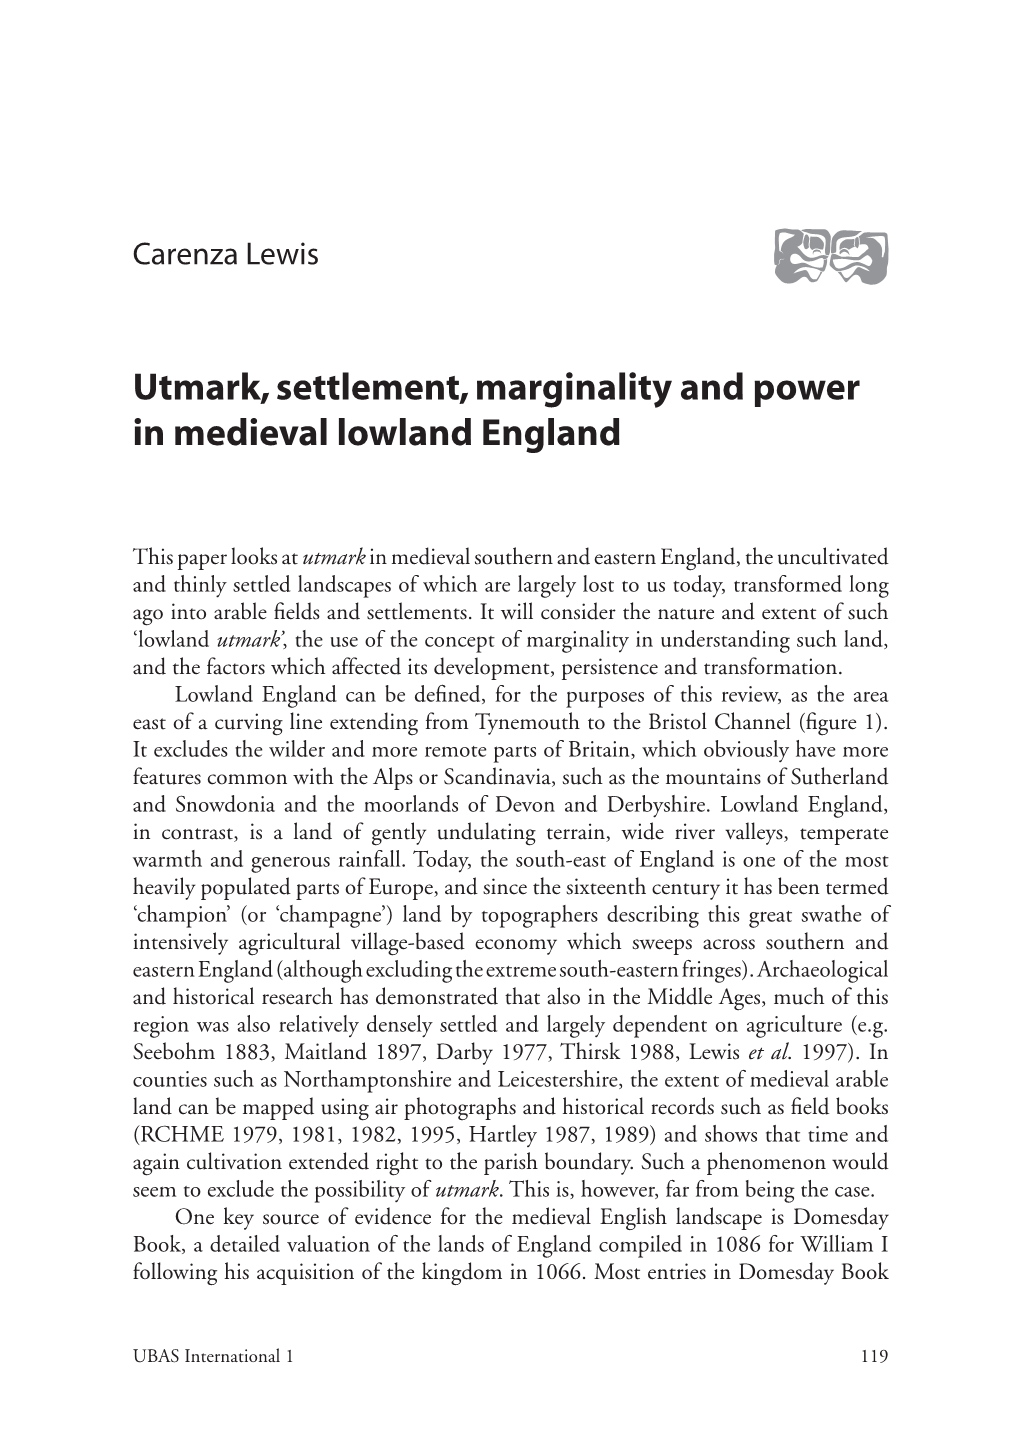 Utmark, Settlement, Marginality and Power in Medieval Lowland England